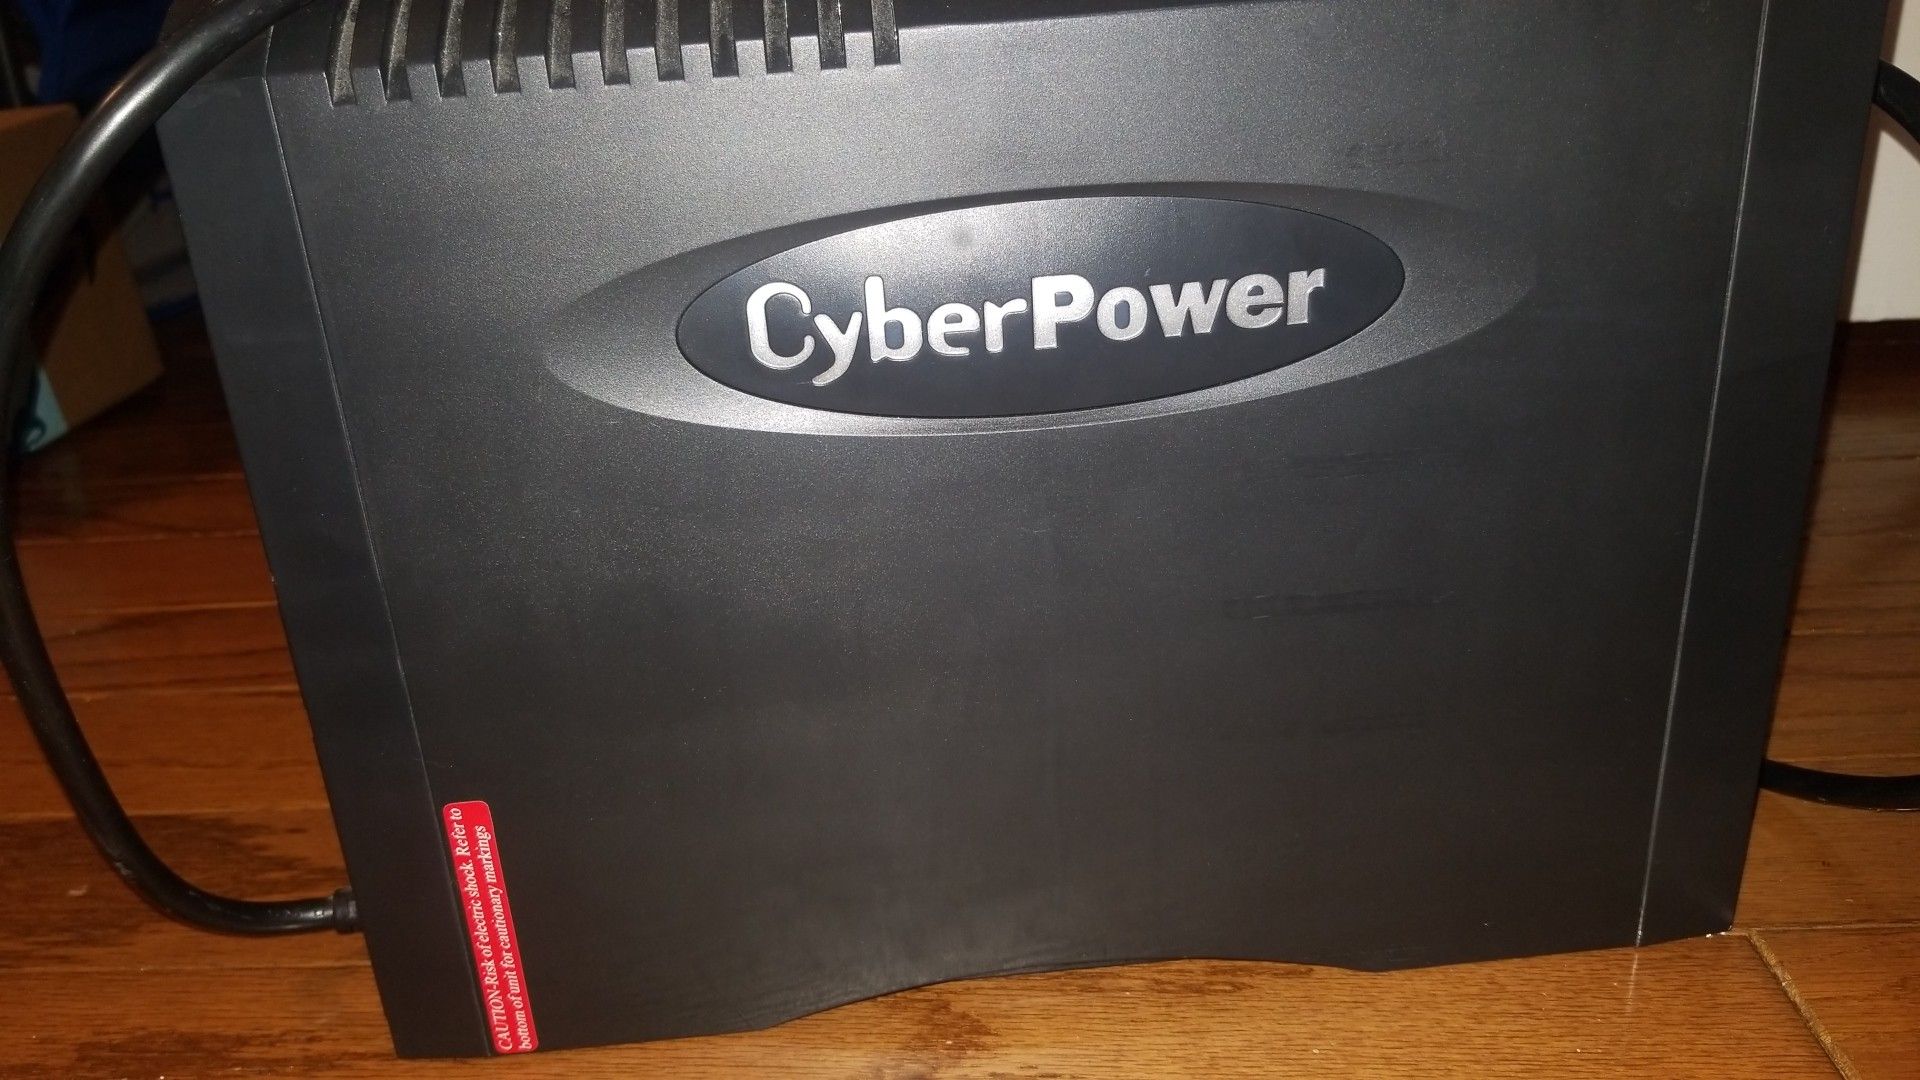 Cyber power. Power back up for computer. Needs new batteries